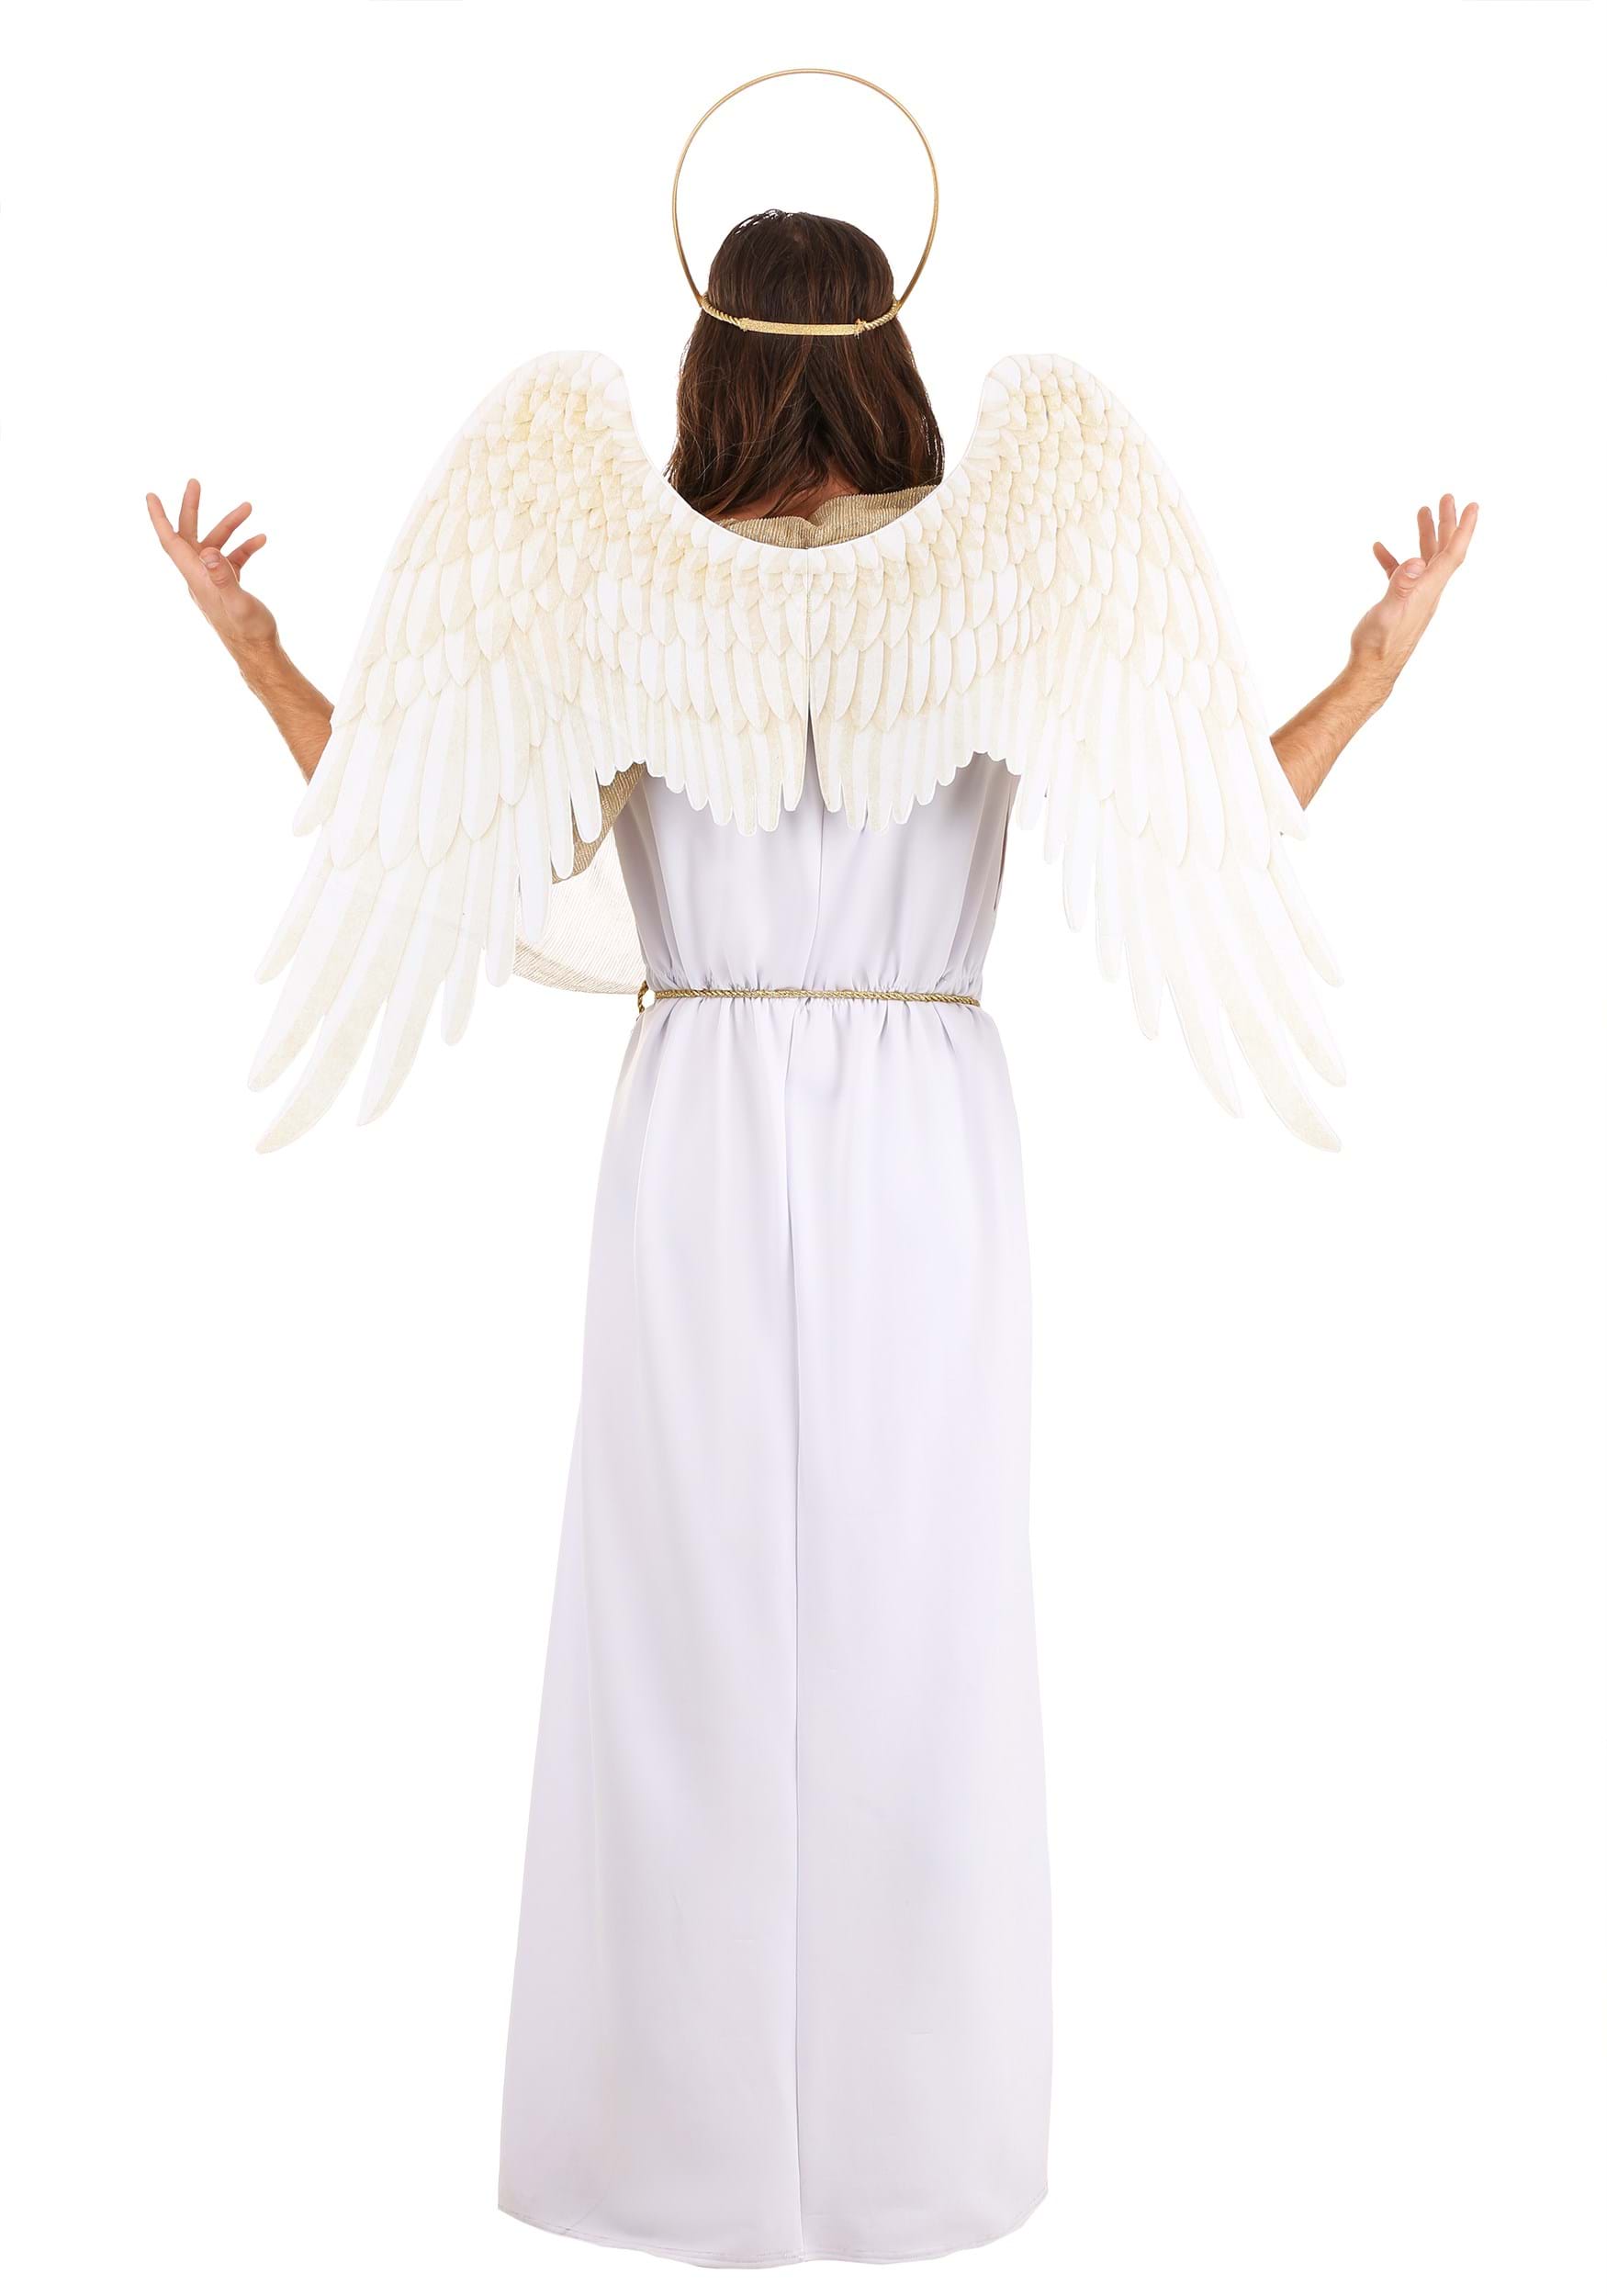 Gold Wings Costume  Wings costume, Costumes, Clothes design